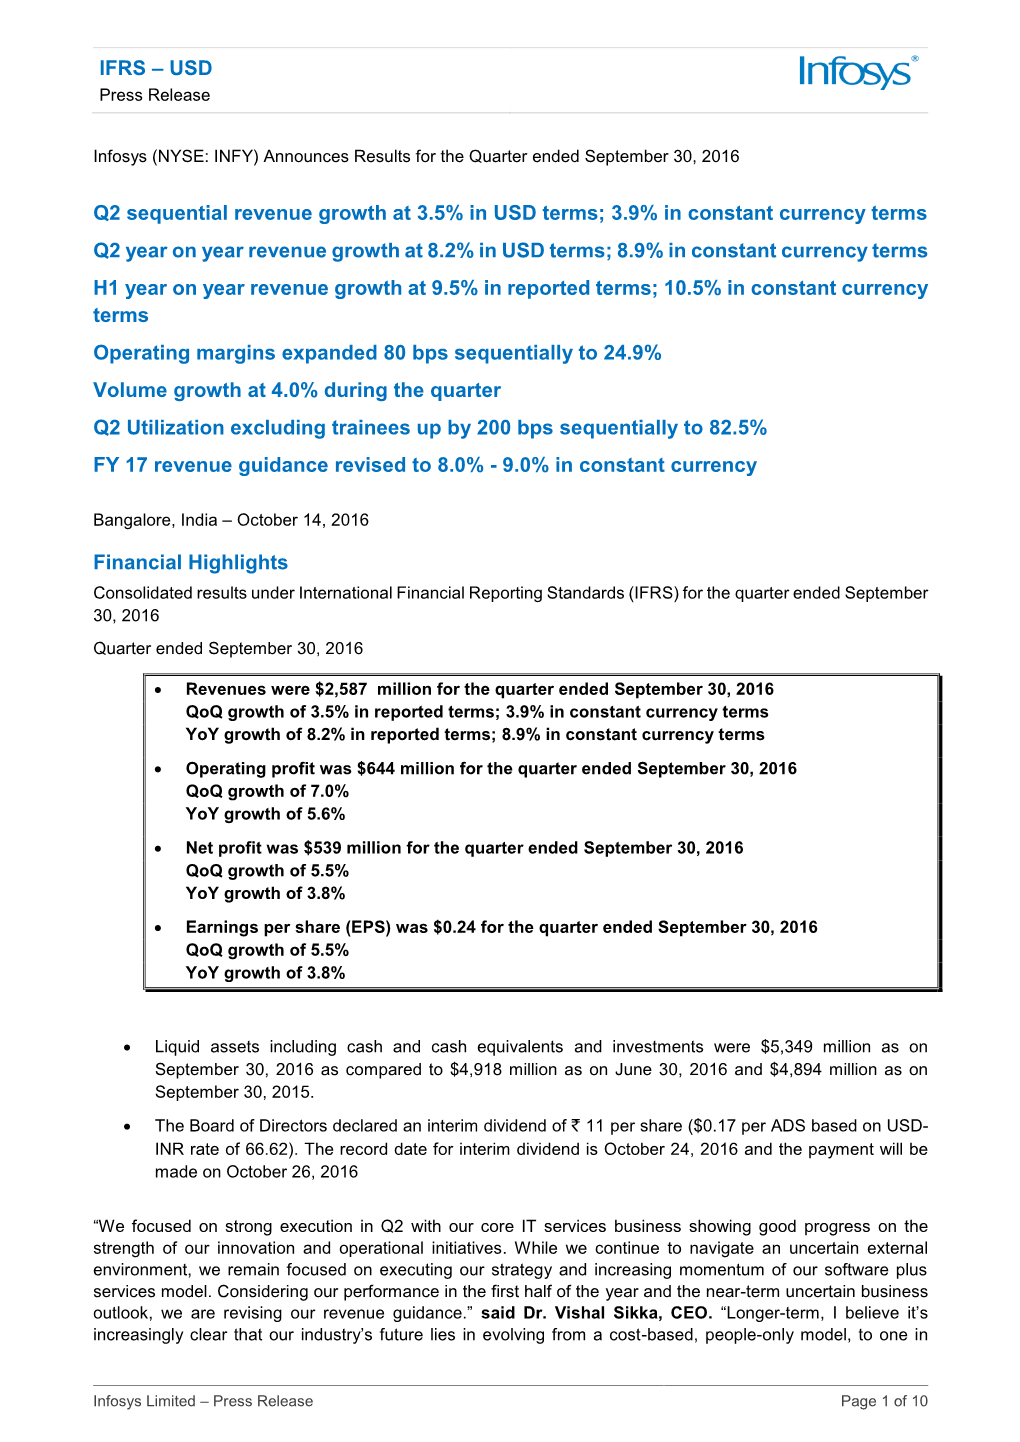 IFRS – USD Q2 Sequential Revenue Growth at 3.5% in USD